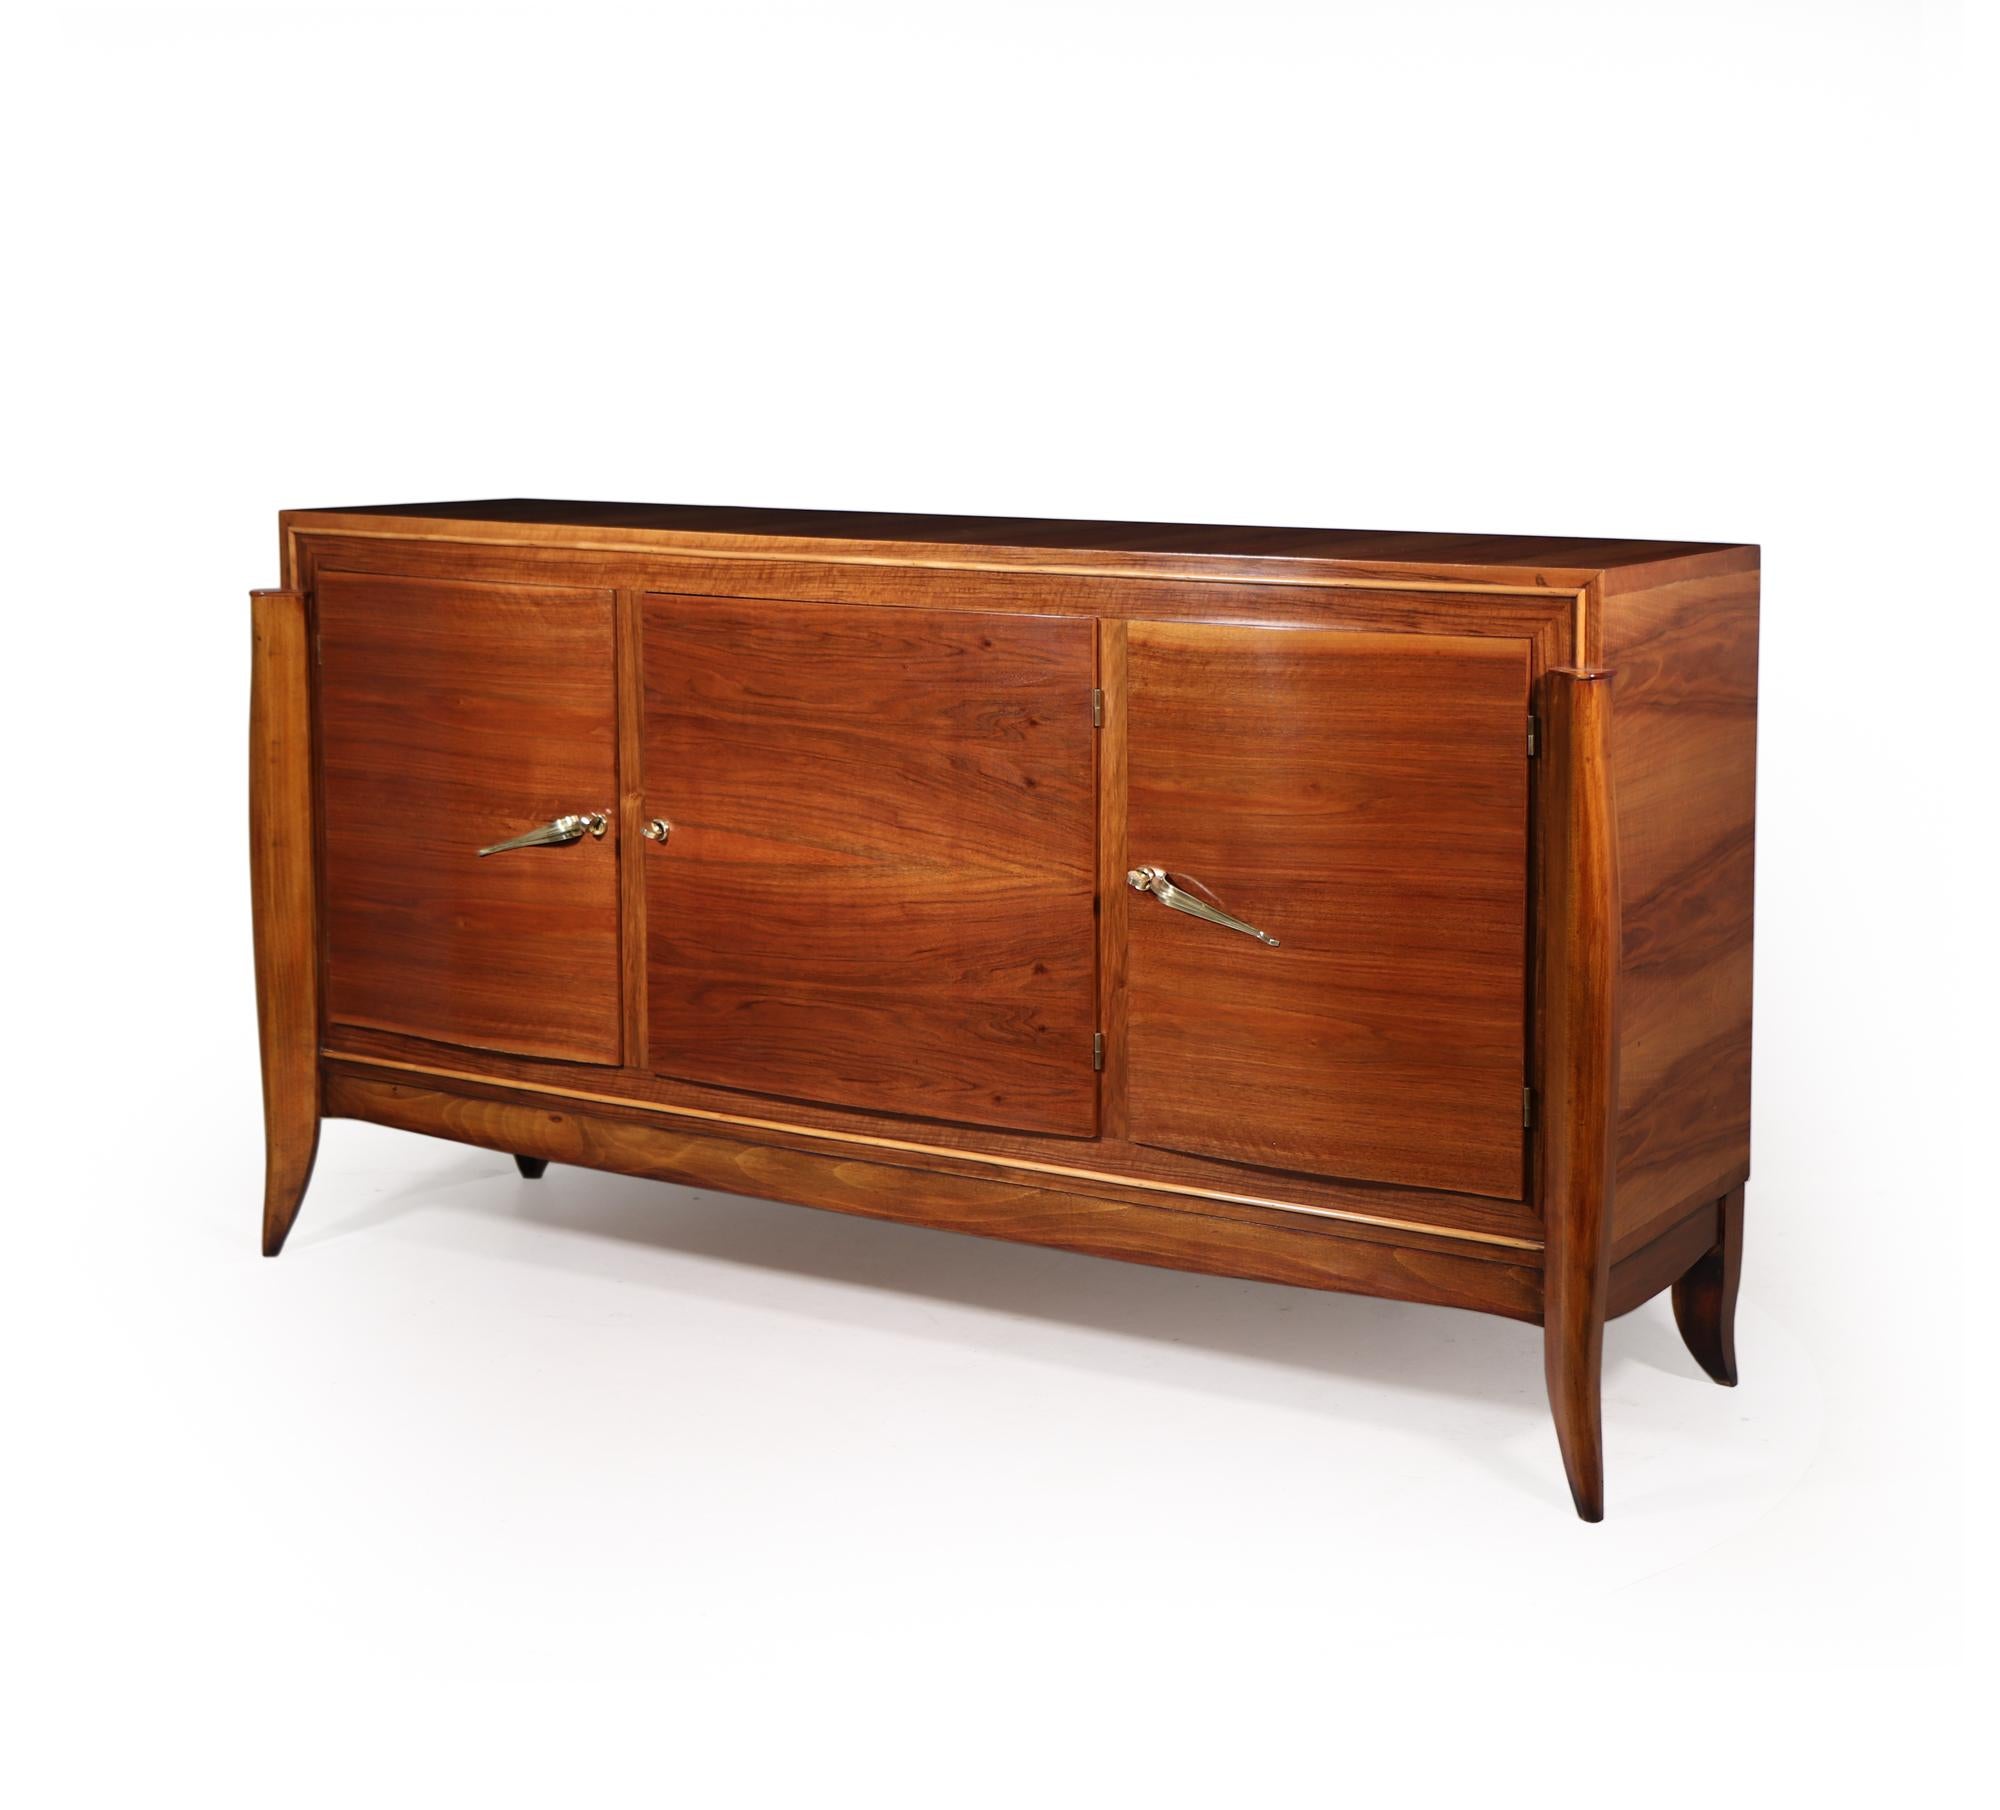 A French three door sideboard in walnut with sabre legs the sideboard has brass handles and three keys, on the inside the sideboard has one long shelf and two drawers, the sideboard has been restored where necessary and full polished by hand and is